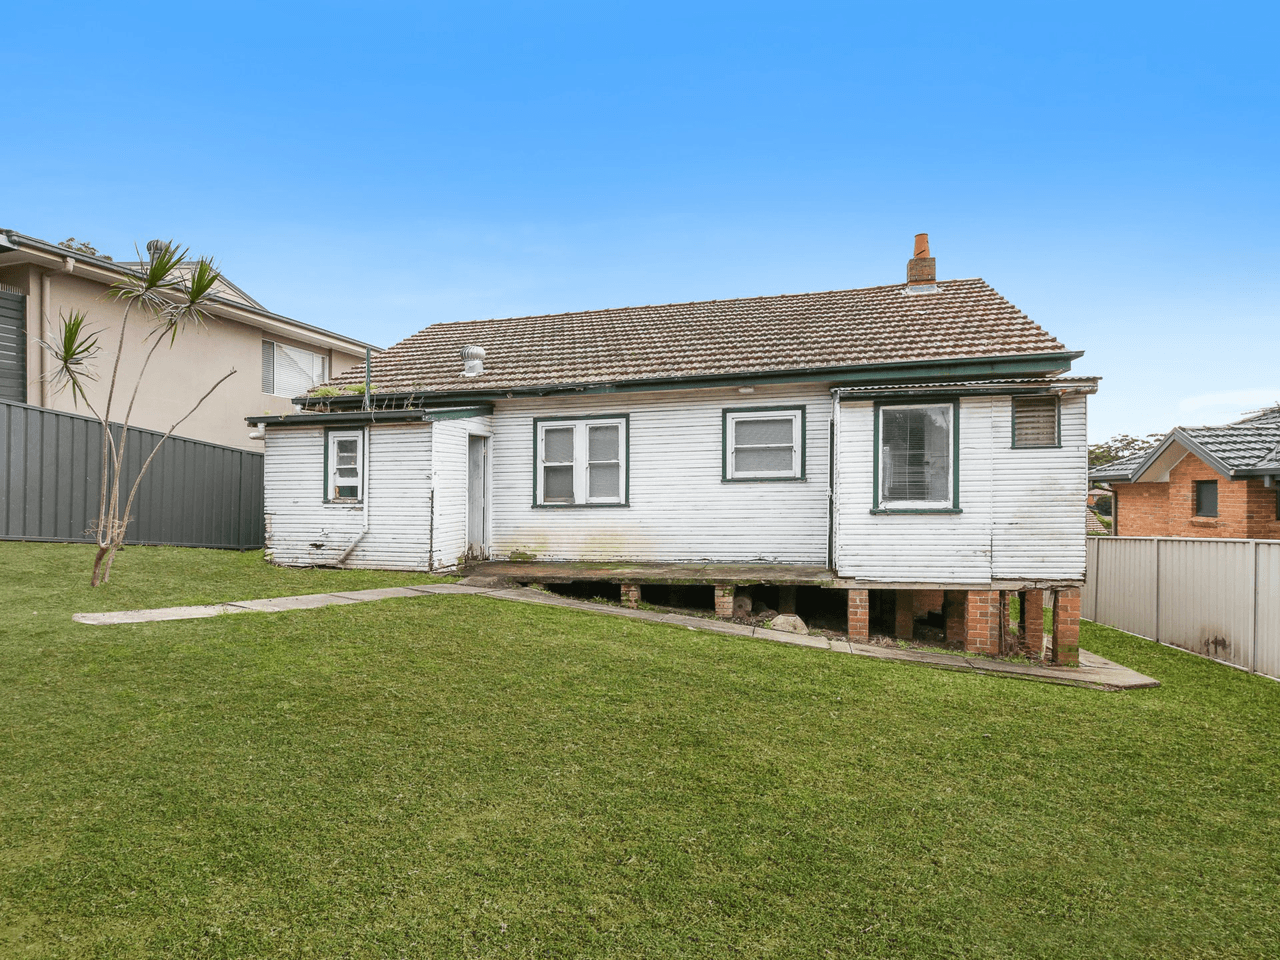 21A Keira Mine Road, KEIRAVILLE, NSW 2500